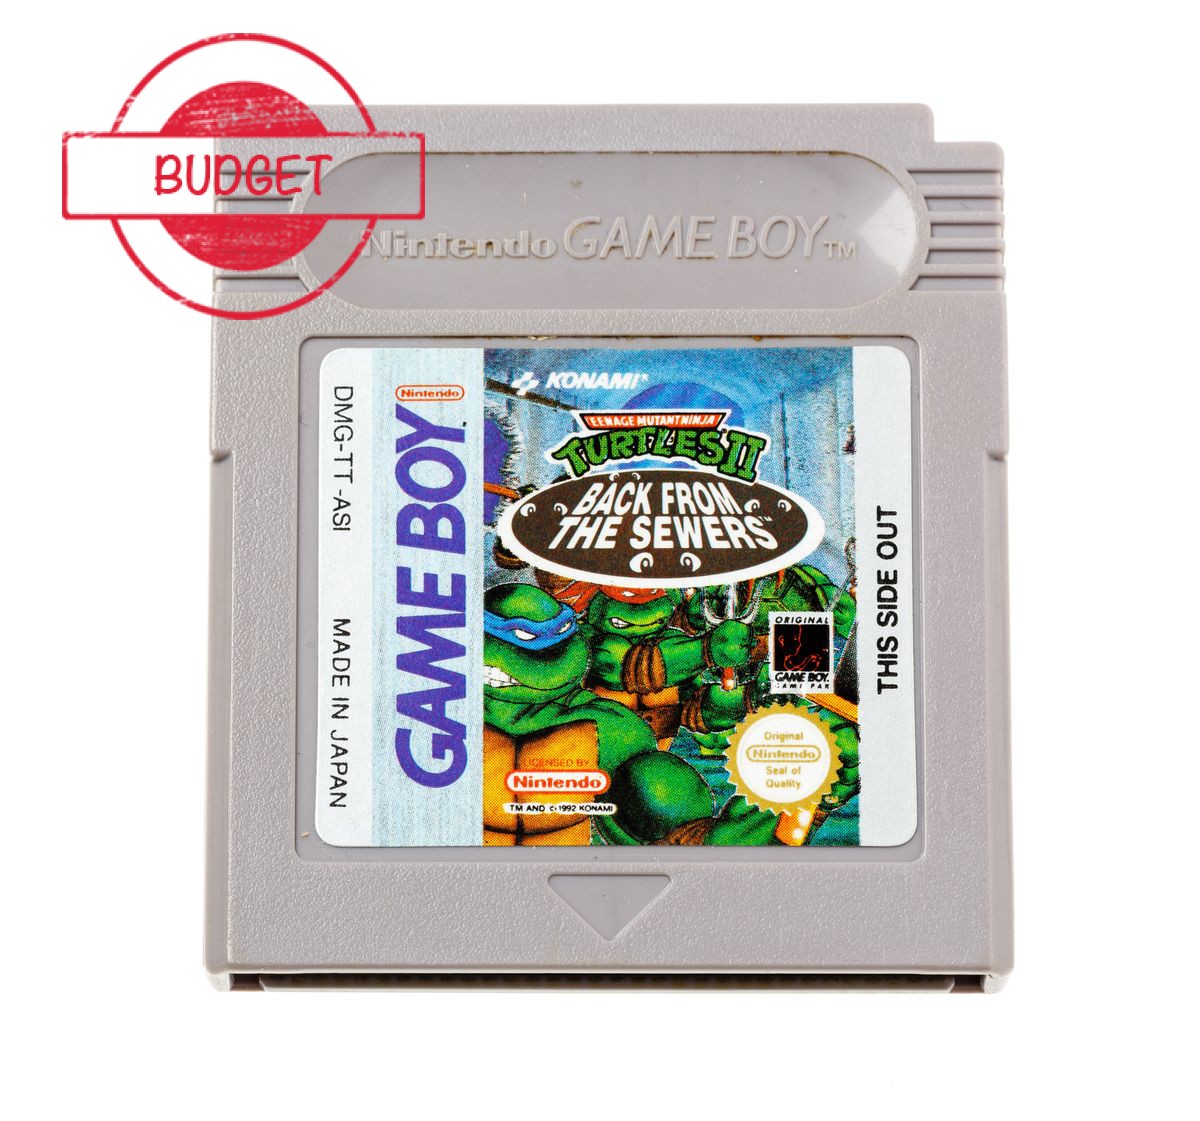 Turtles II Back from the Sewers - Budget - Gameboy Classic Games